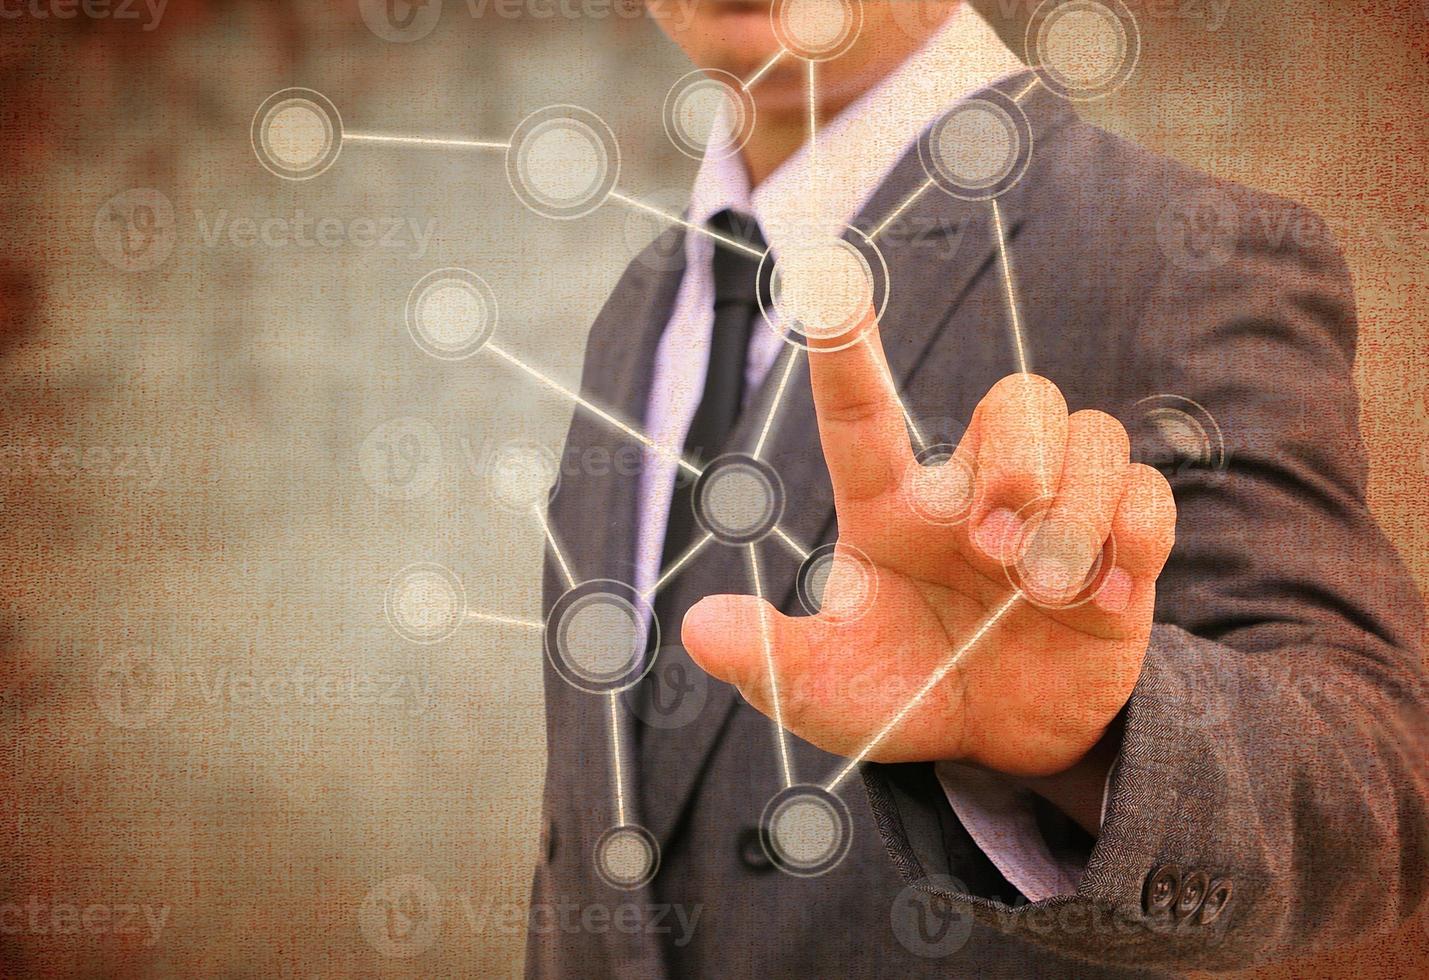 businessman pushing a touch screen interface in the old paper photo